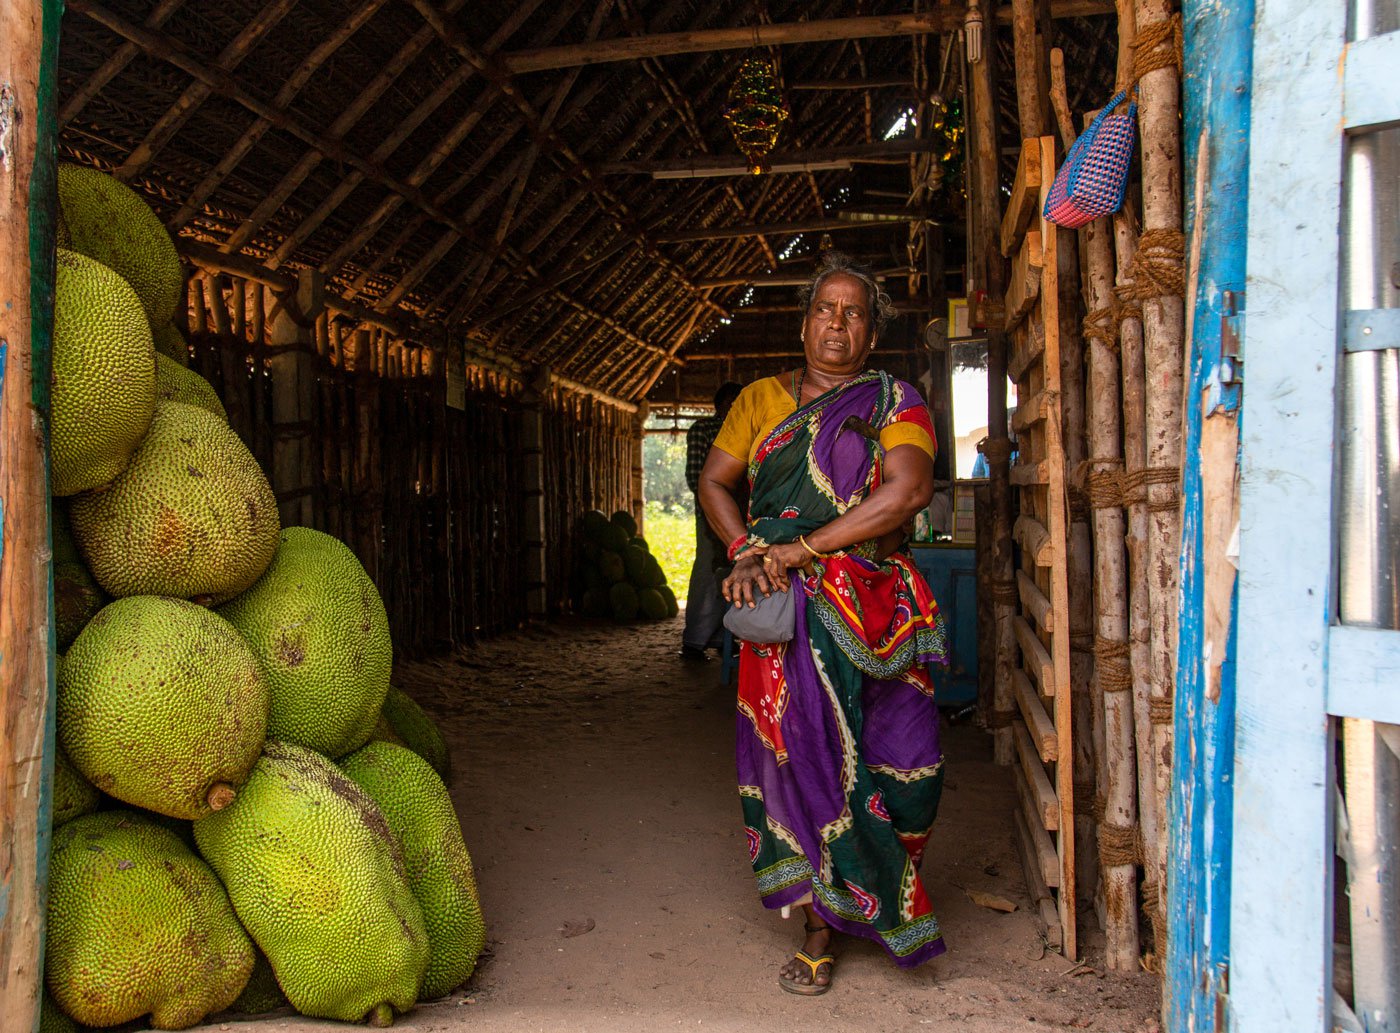 Lakshmi sets the price for thousands of kilos of jackfruit every year. She is one of the very few senior women traders in any agribusiness